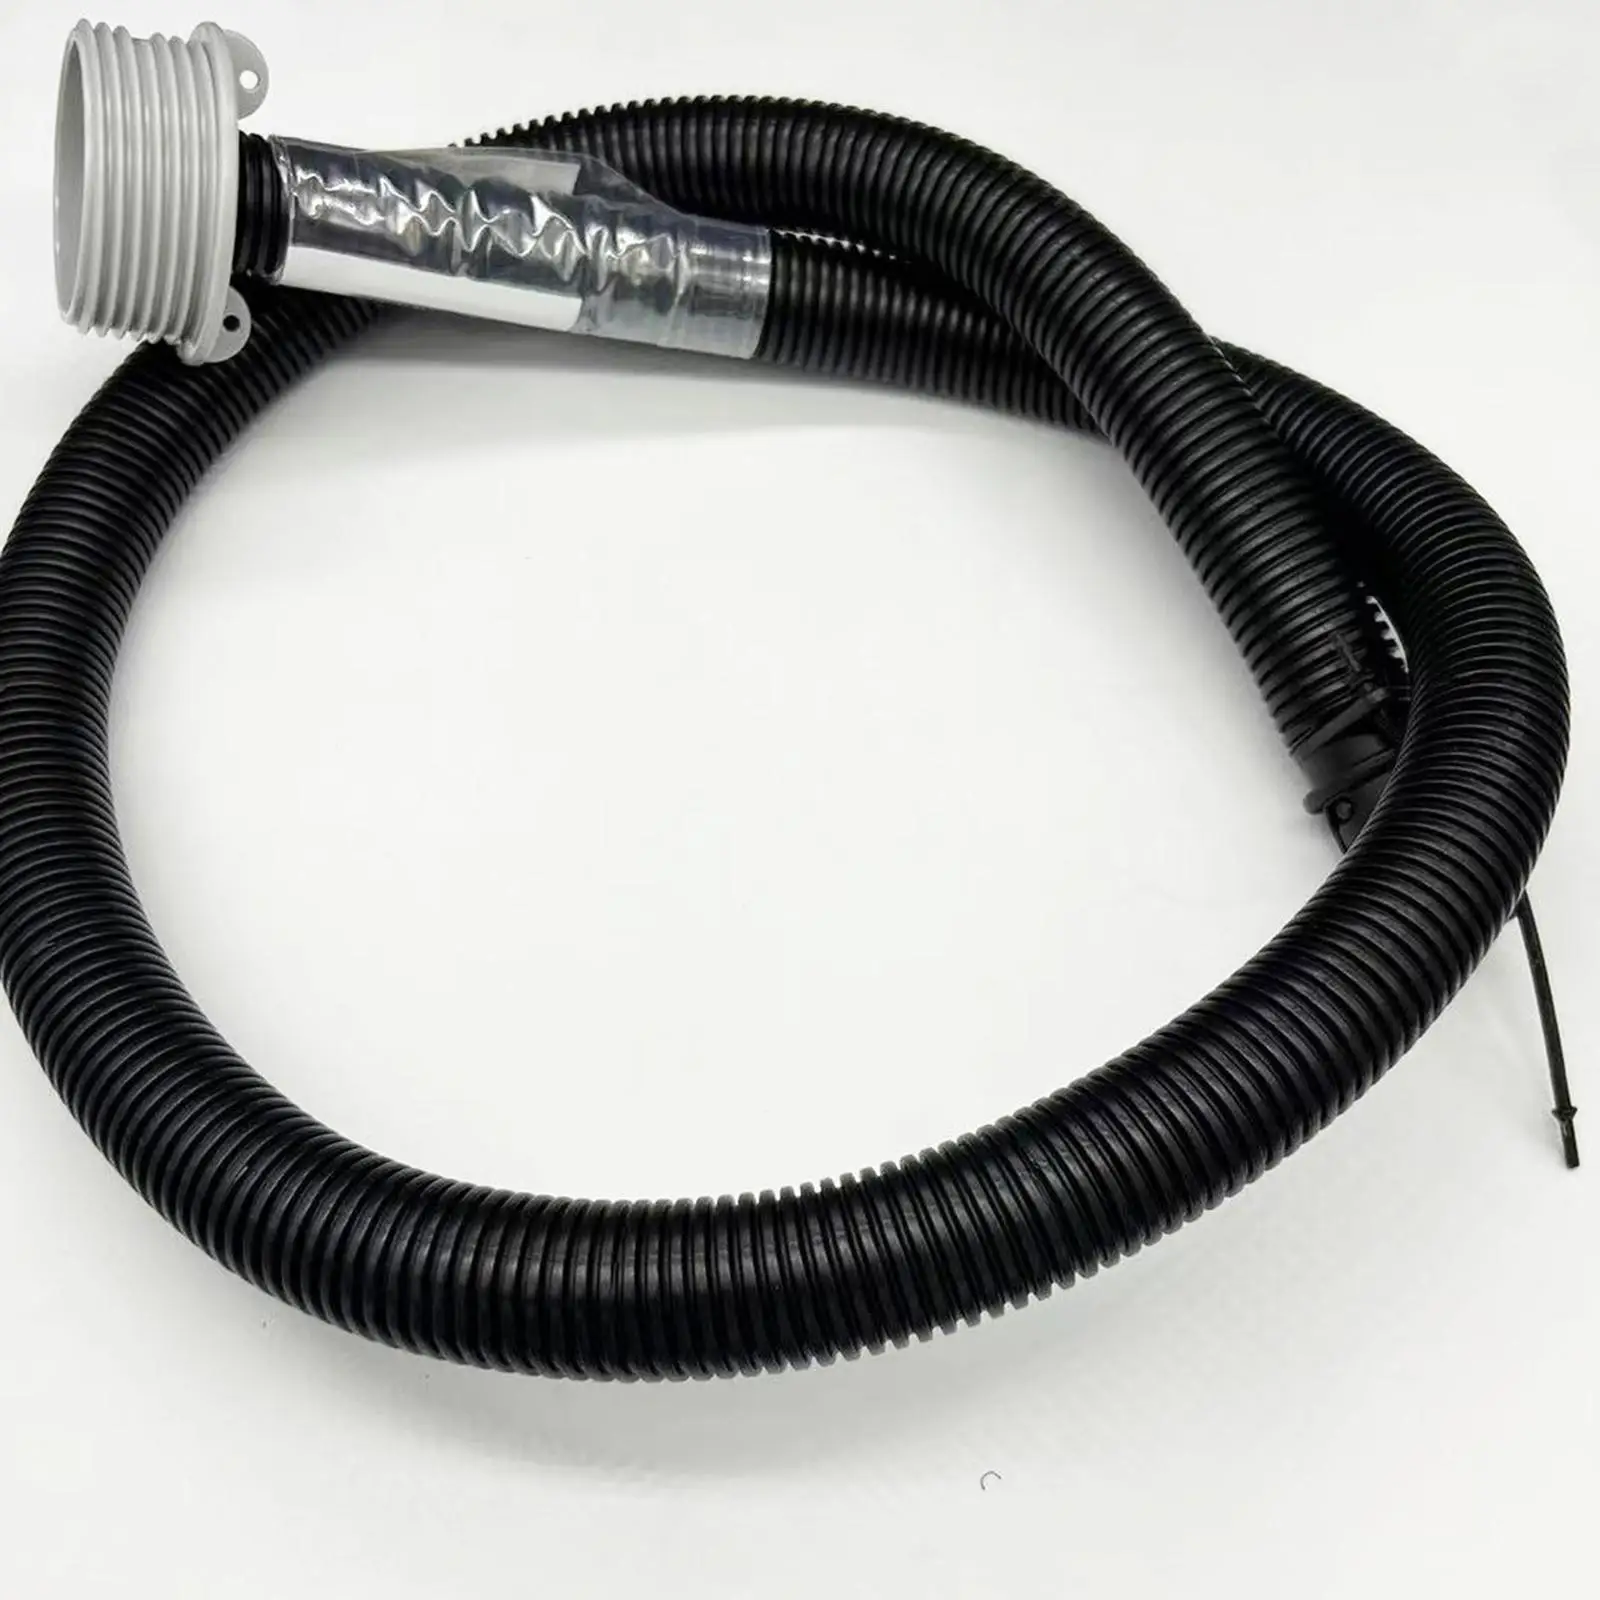 SPA Inflation Hose Flexible Replace Part Tub Inflation Hose Hot Tub Inflation